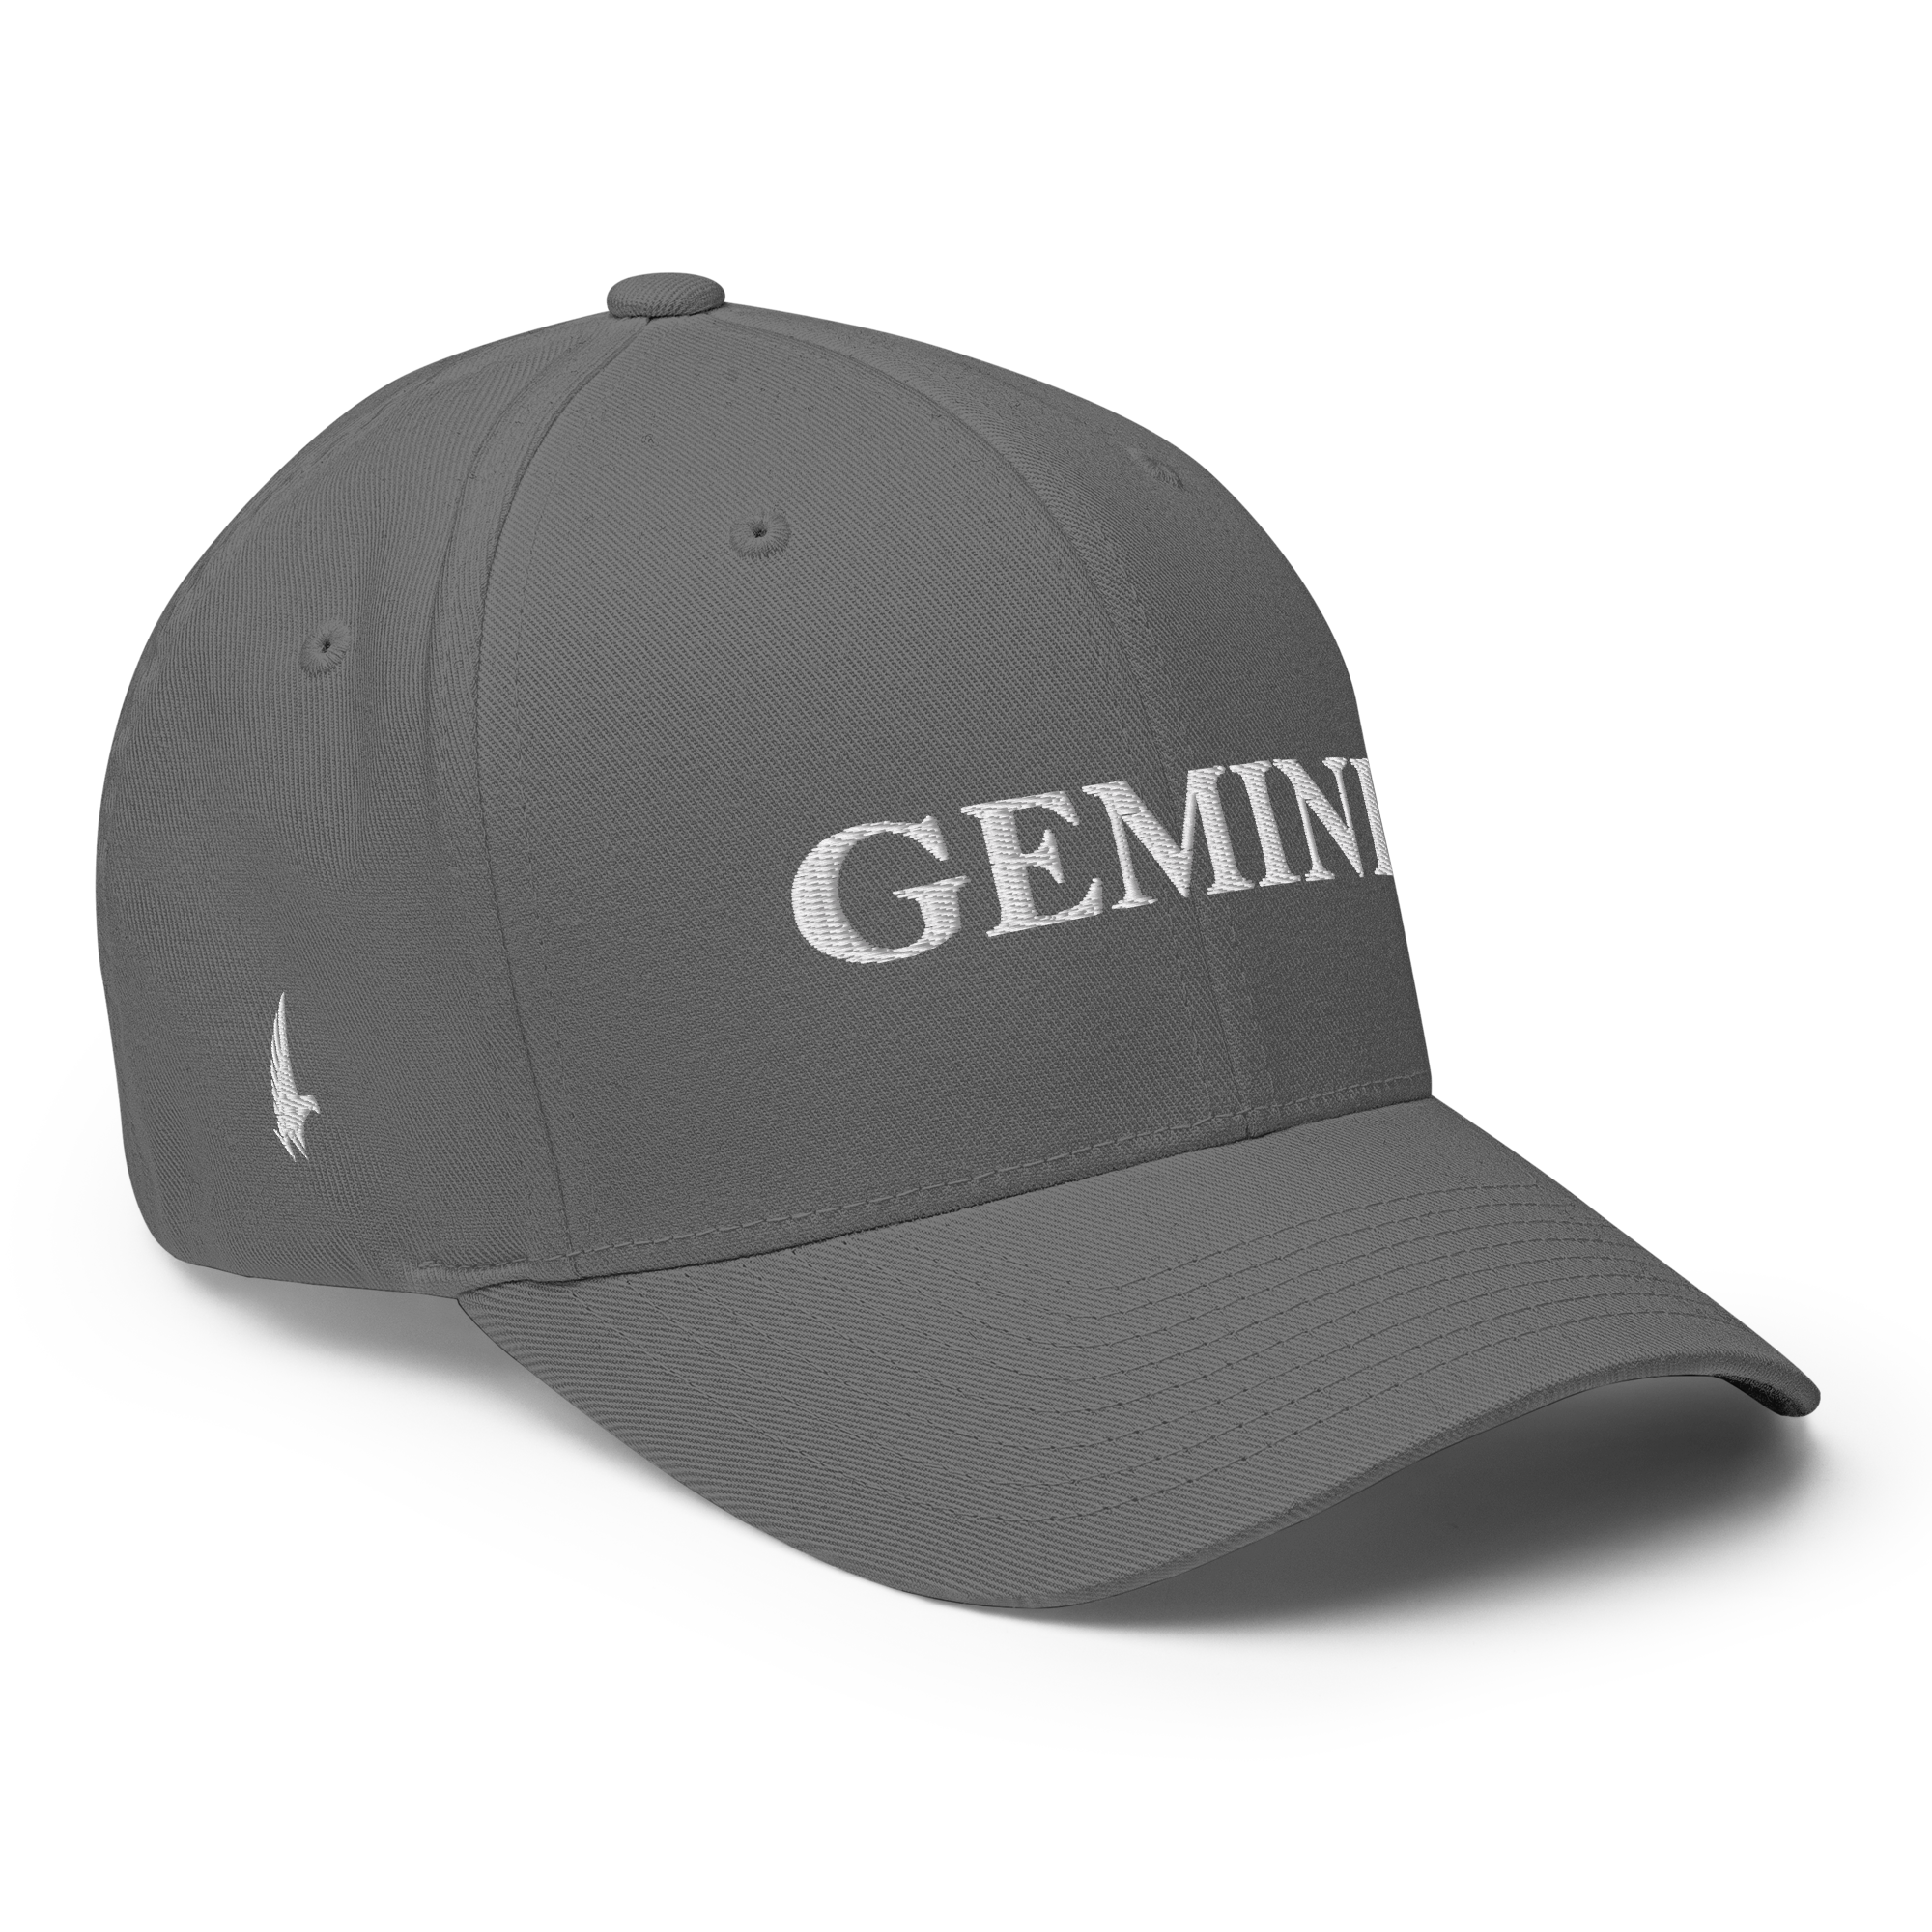 Original Gemini Fitted Hat Grey Fitted - Loyalty Vibes